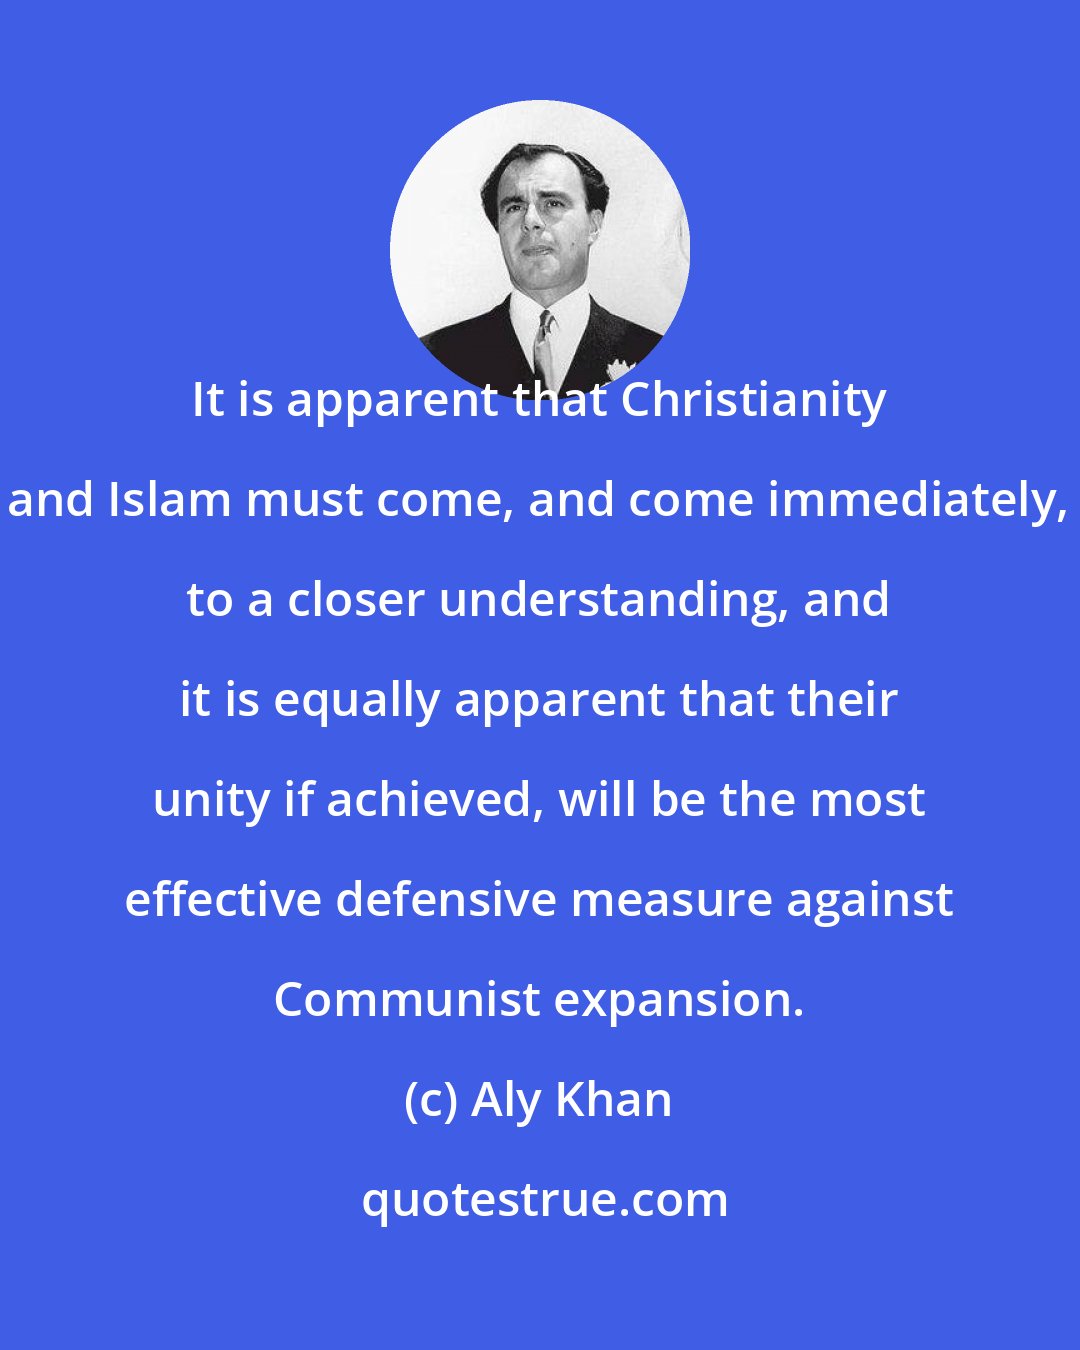 Aly Khan: It is apparent that Christianity and Islam must come, and come immediately, to a closer understanding, and it is equally apparent that their unity if achieved, will be the most effective defensive measure against Communist expansion.